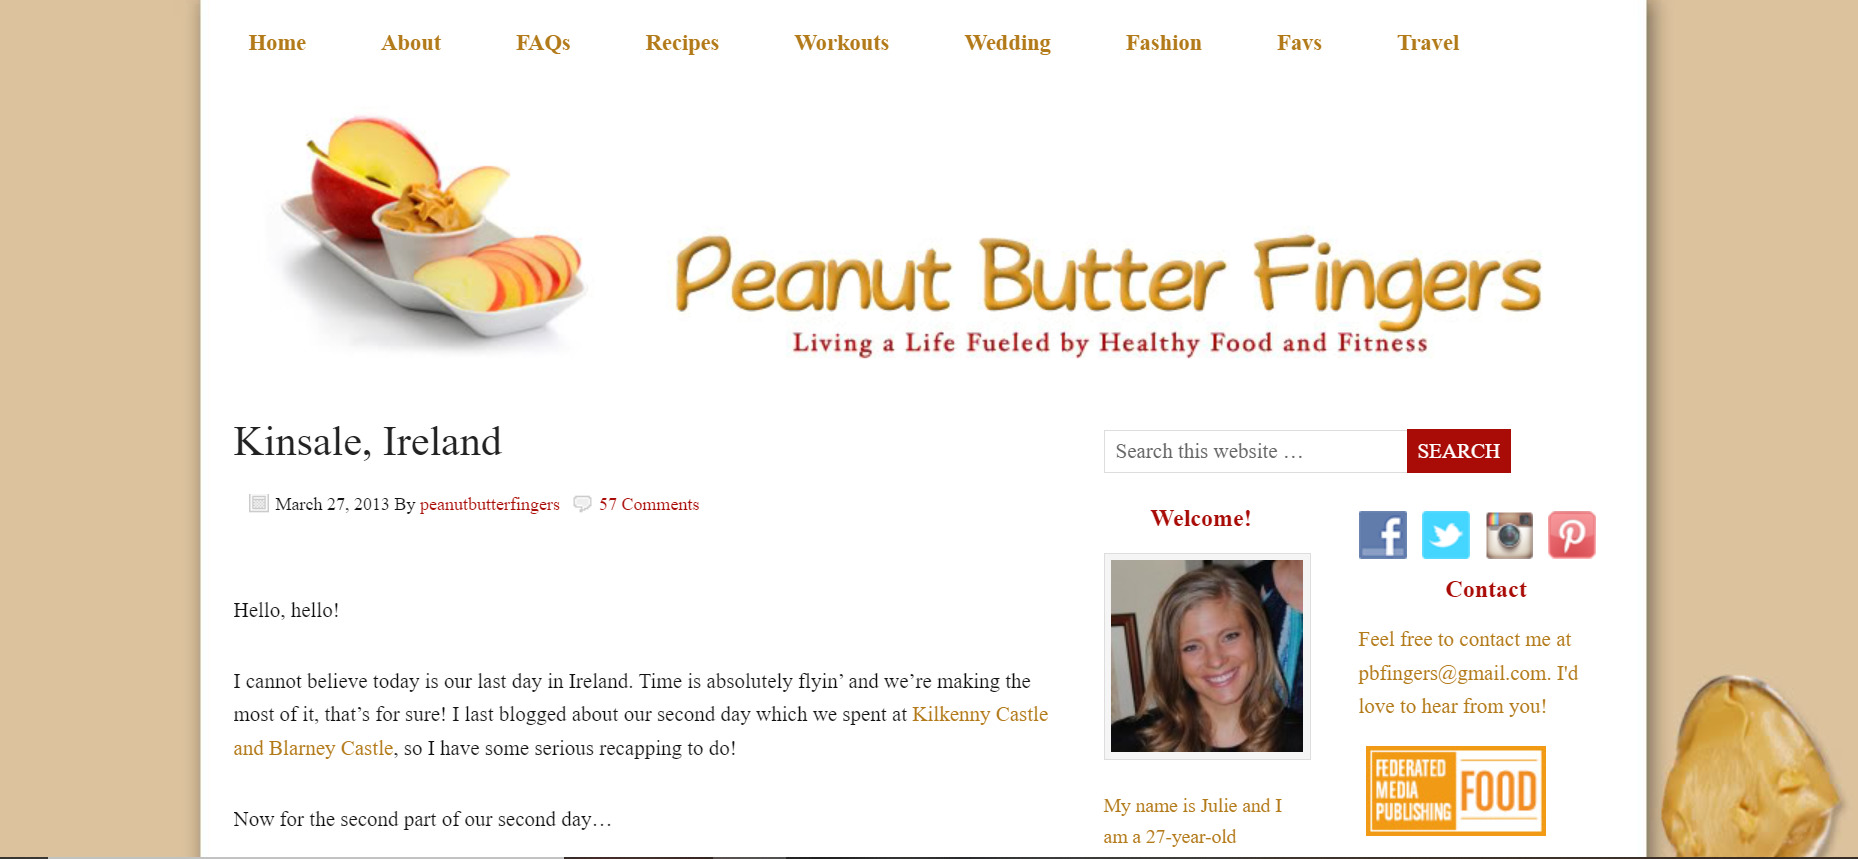 PBF Gift Guide 2015: Fitness Finds - Peanut Butter Fingers